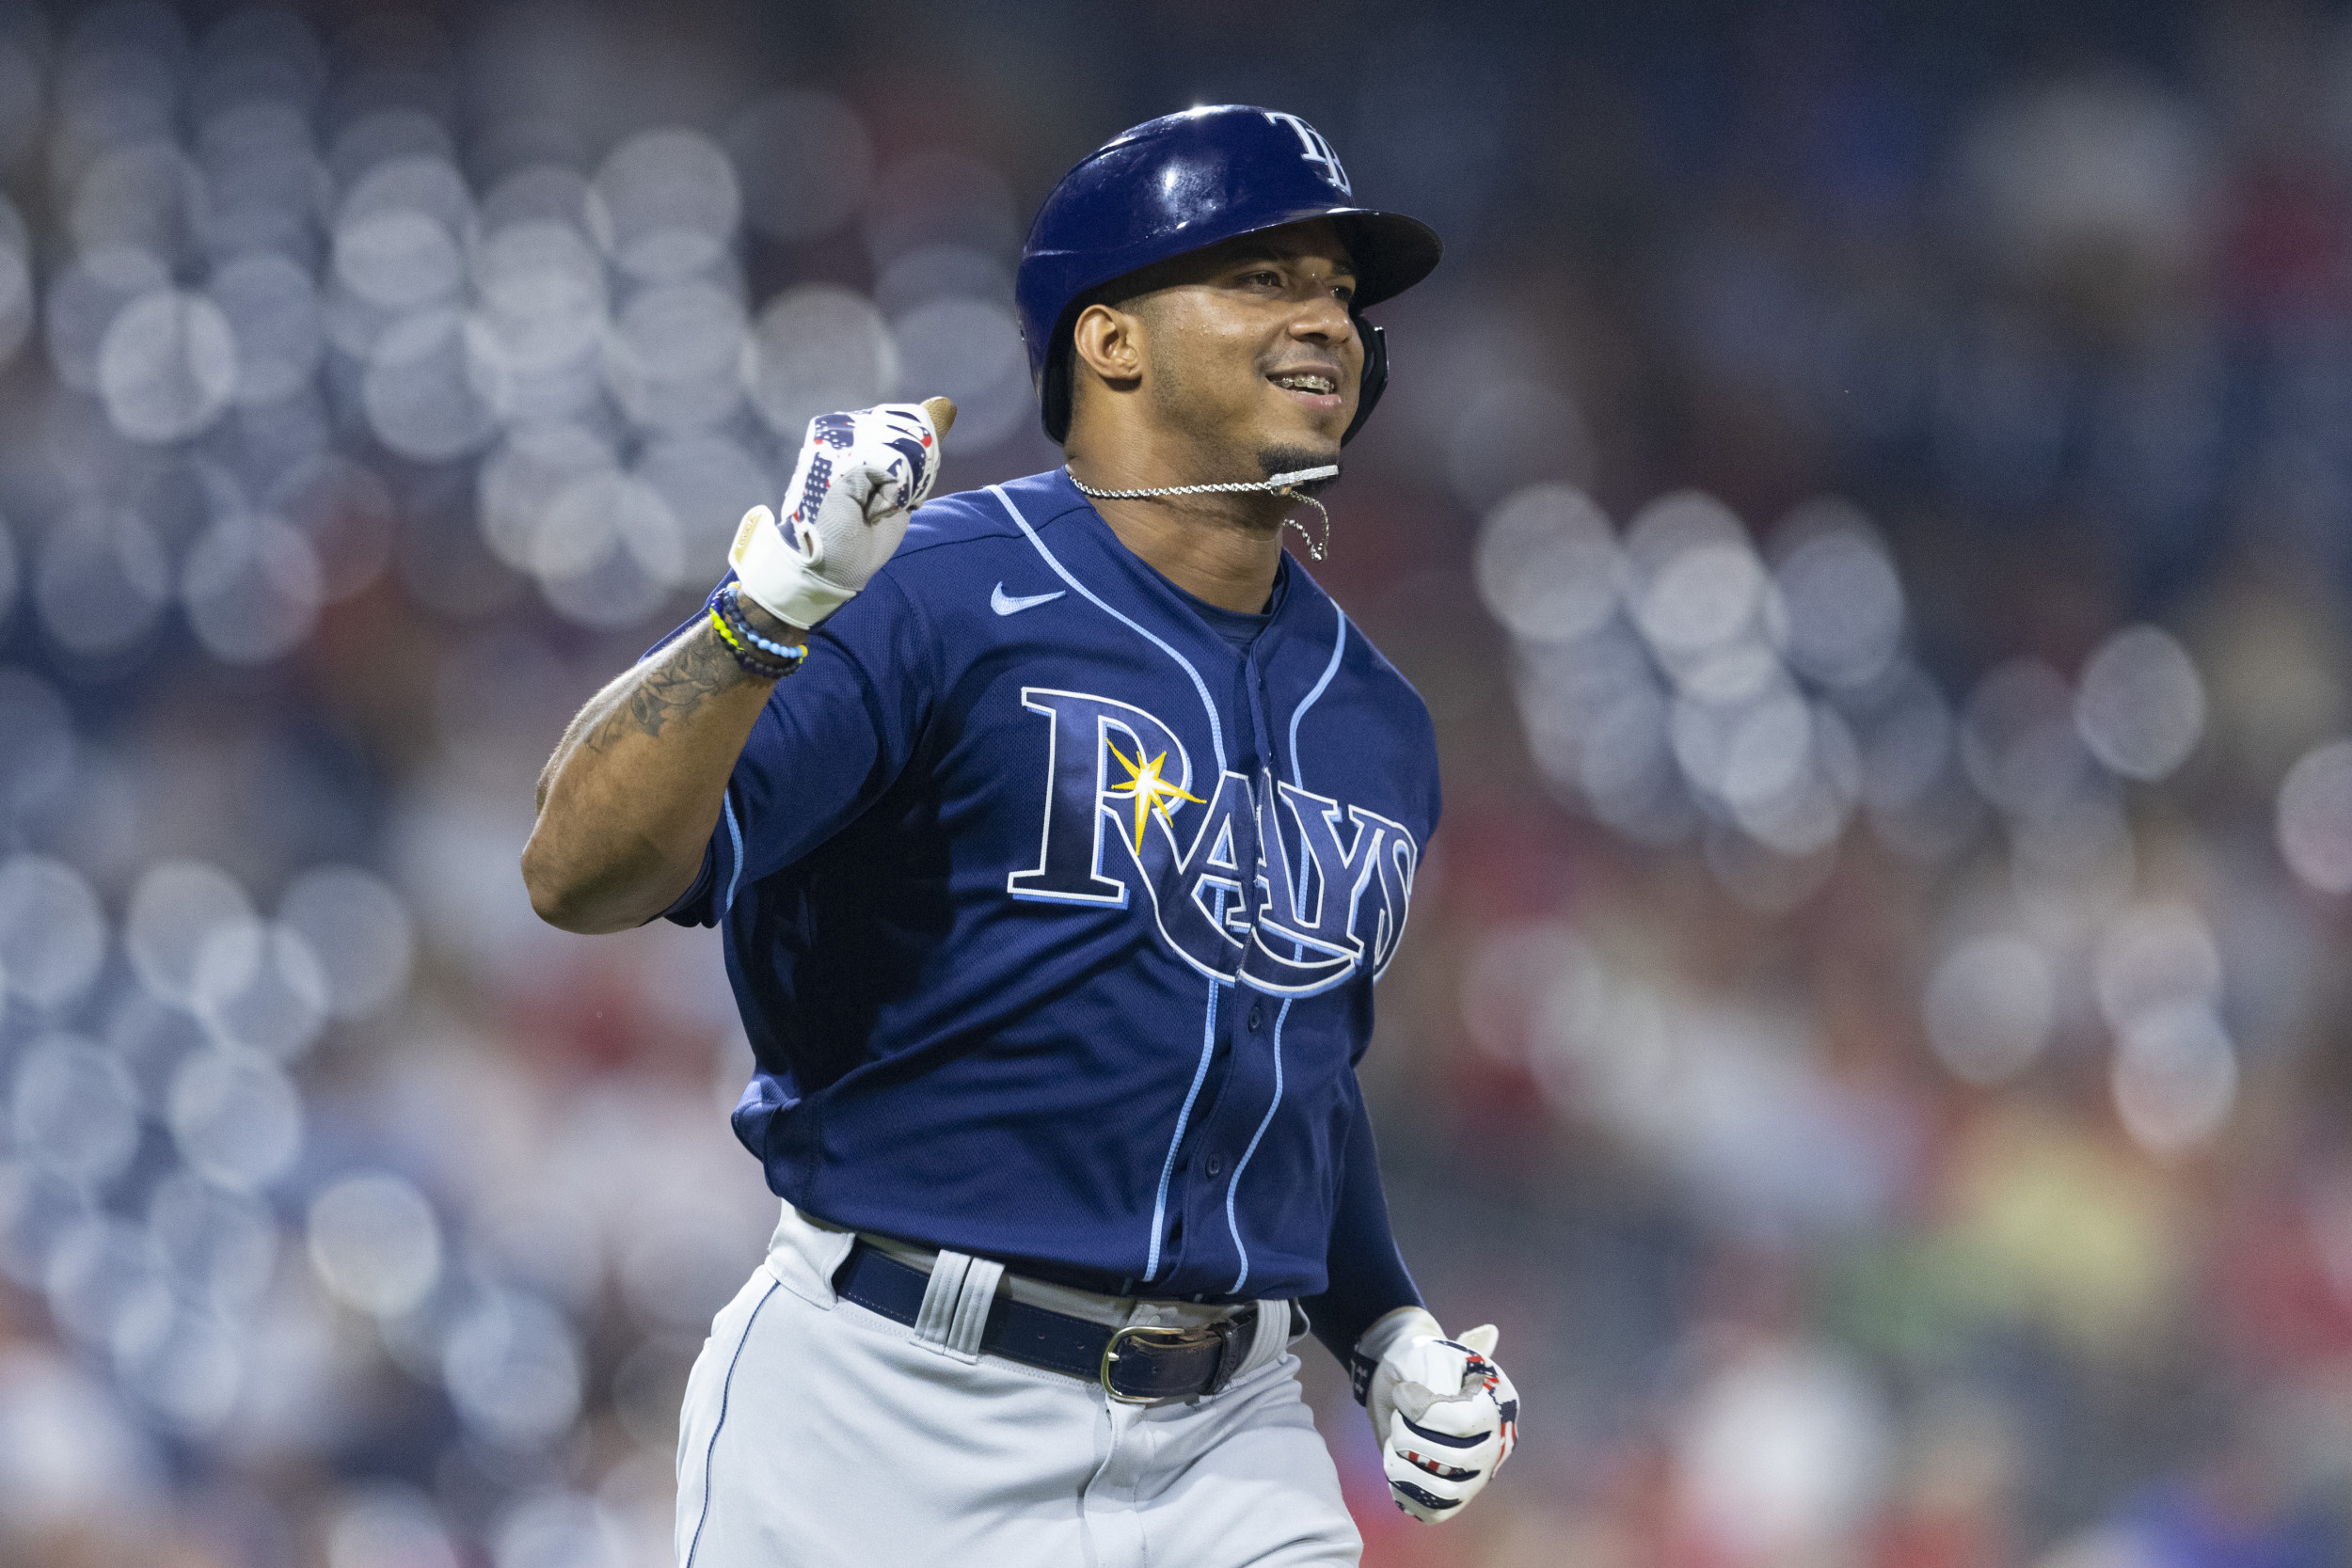 Wander Franco stats: 20-year-old is making history with Rays